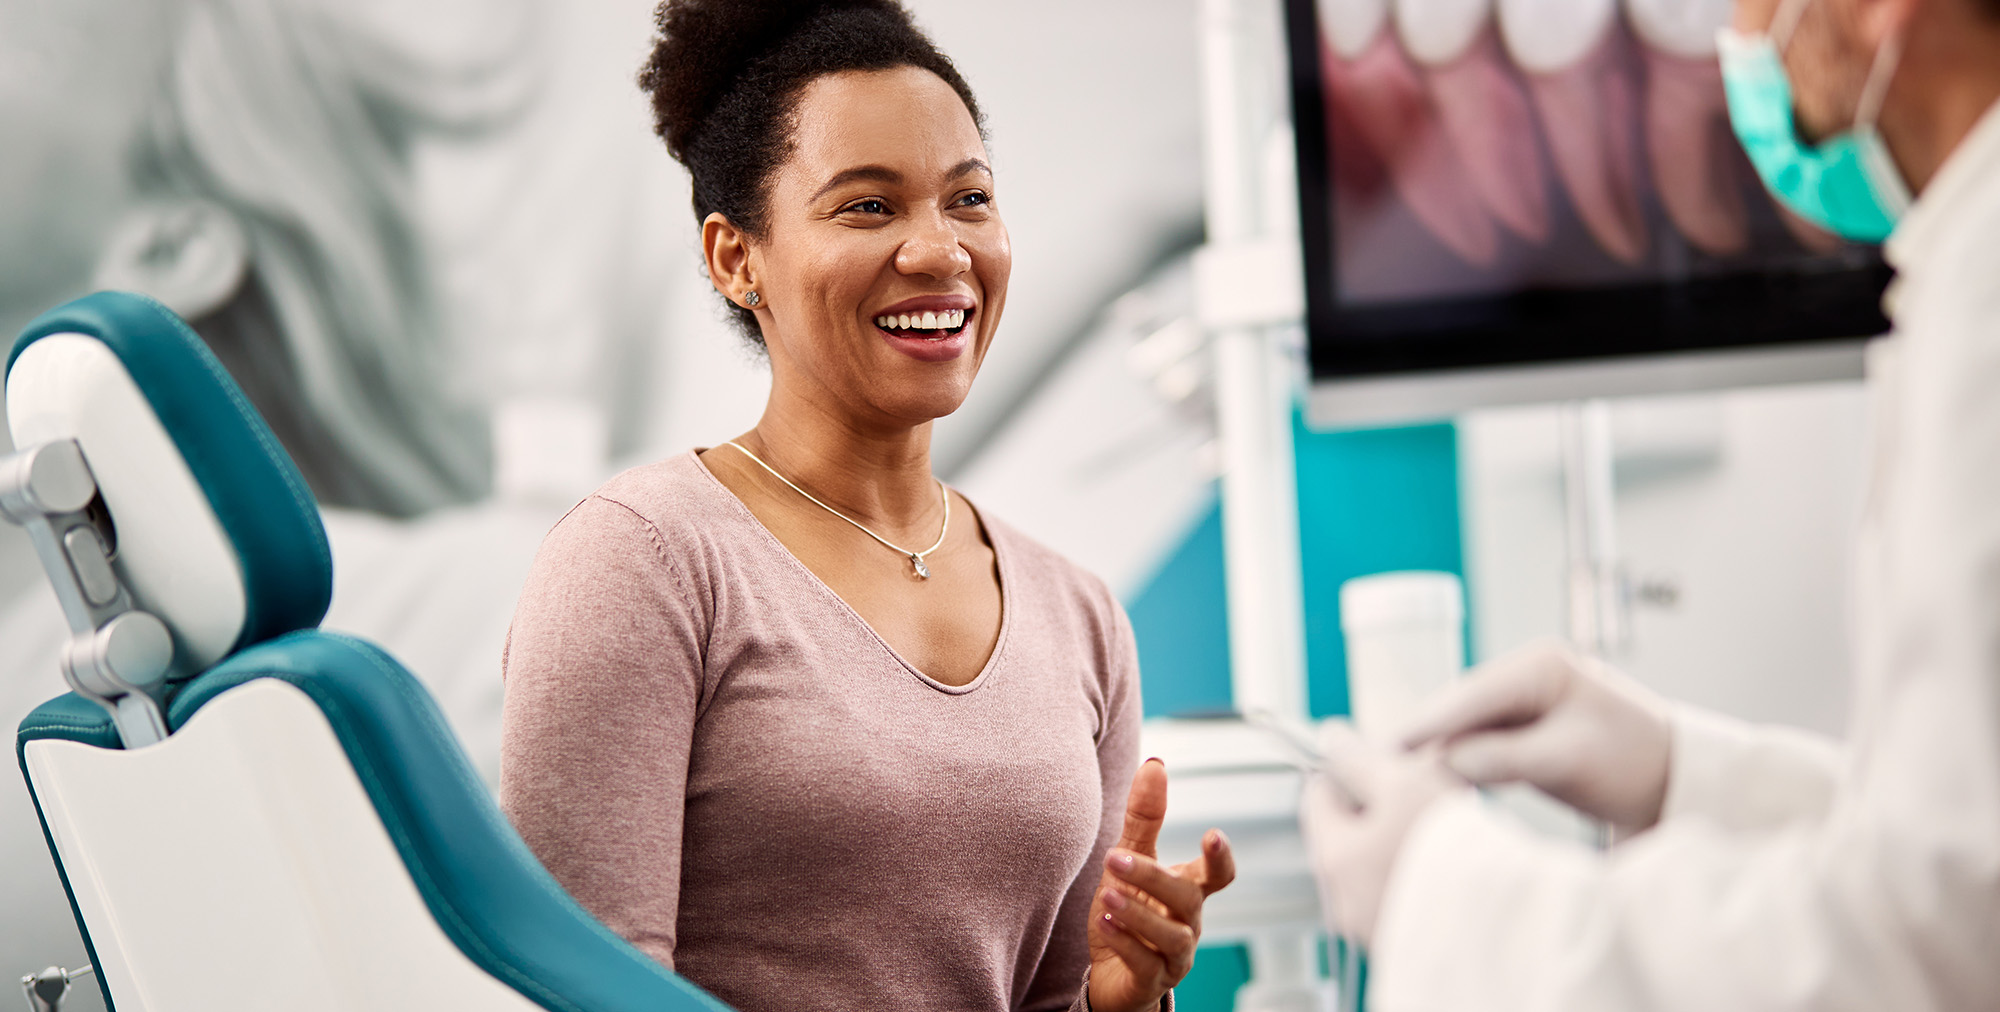 Happy woman talks to her dentist during appointment at dental clinic.